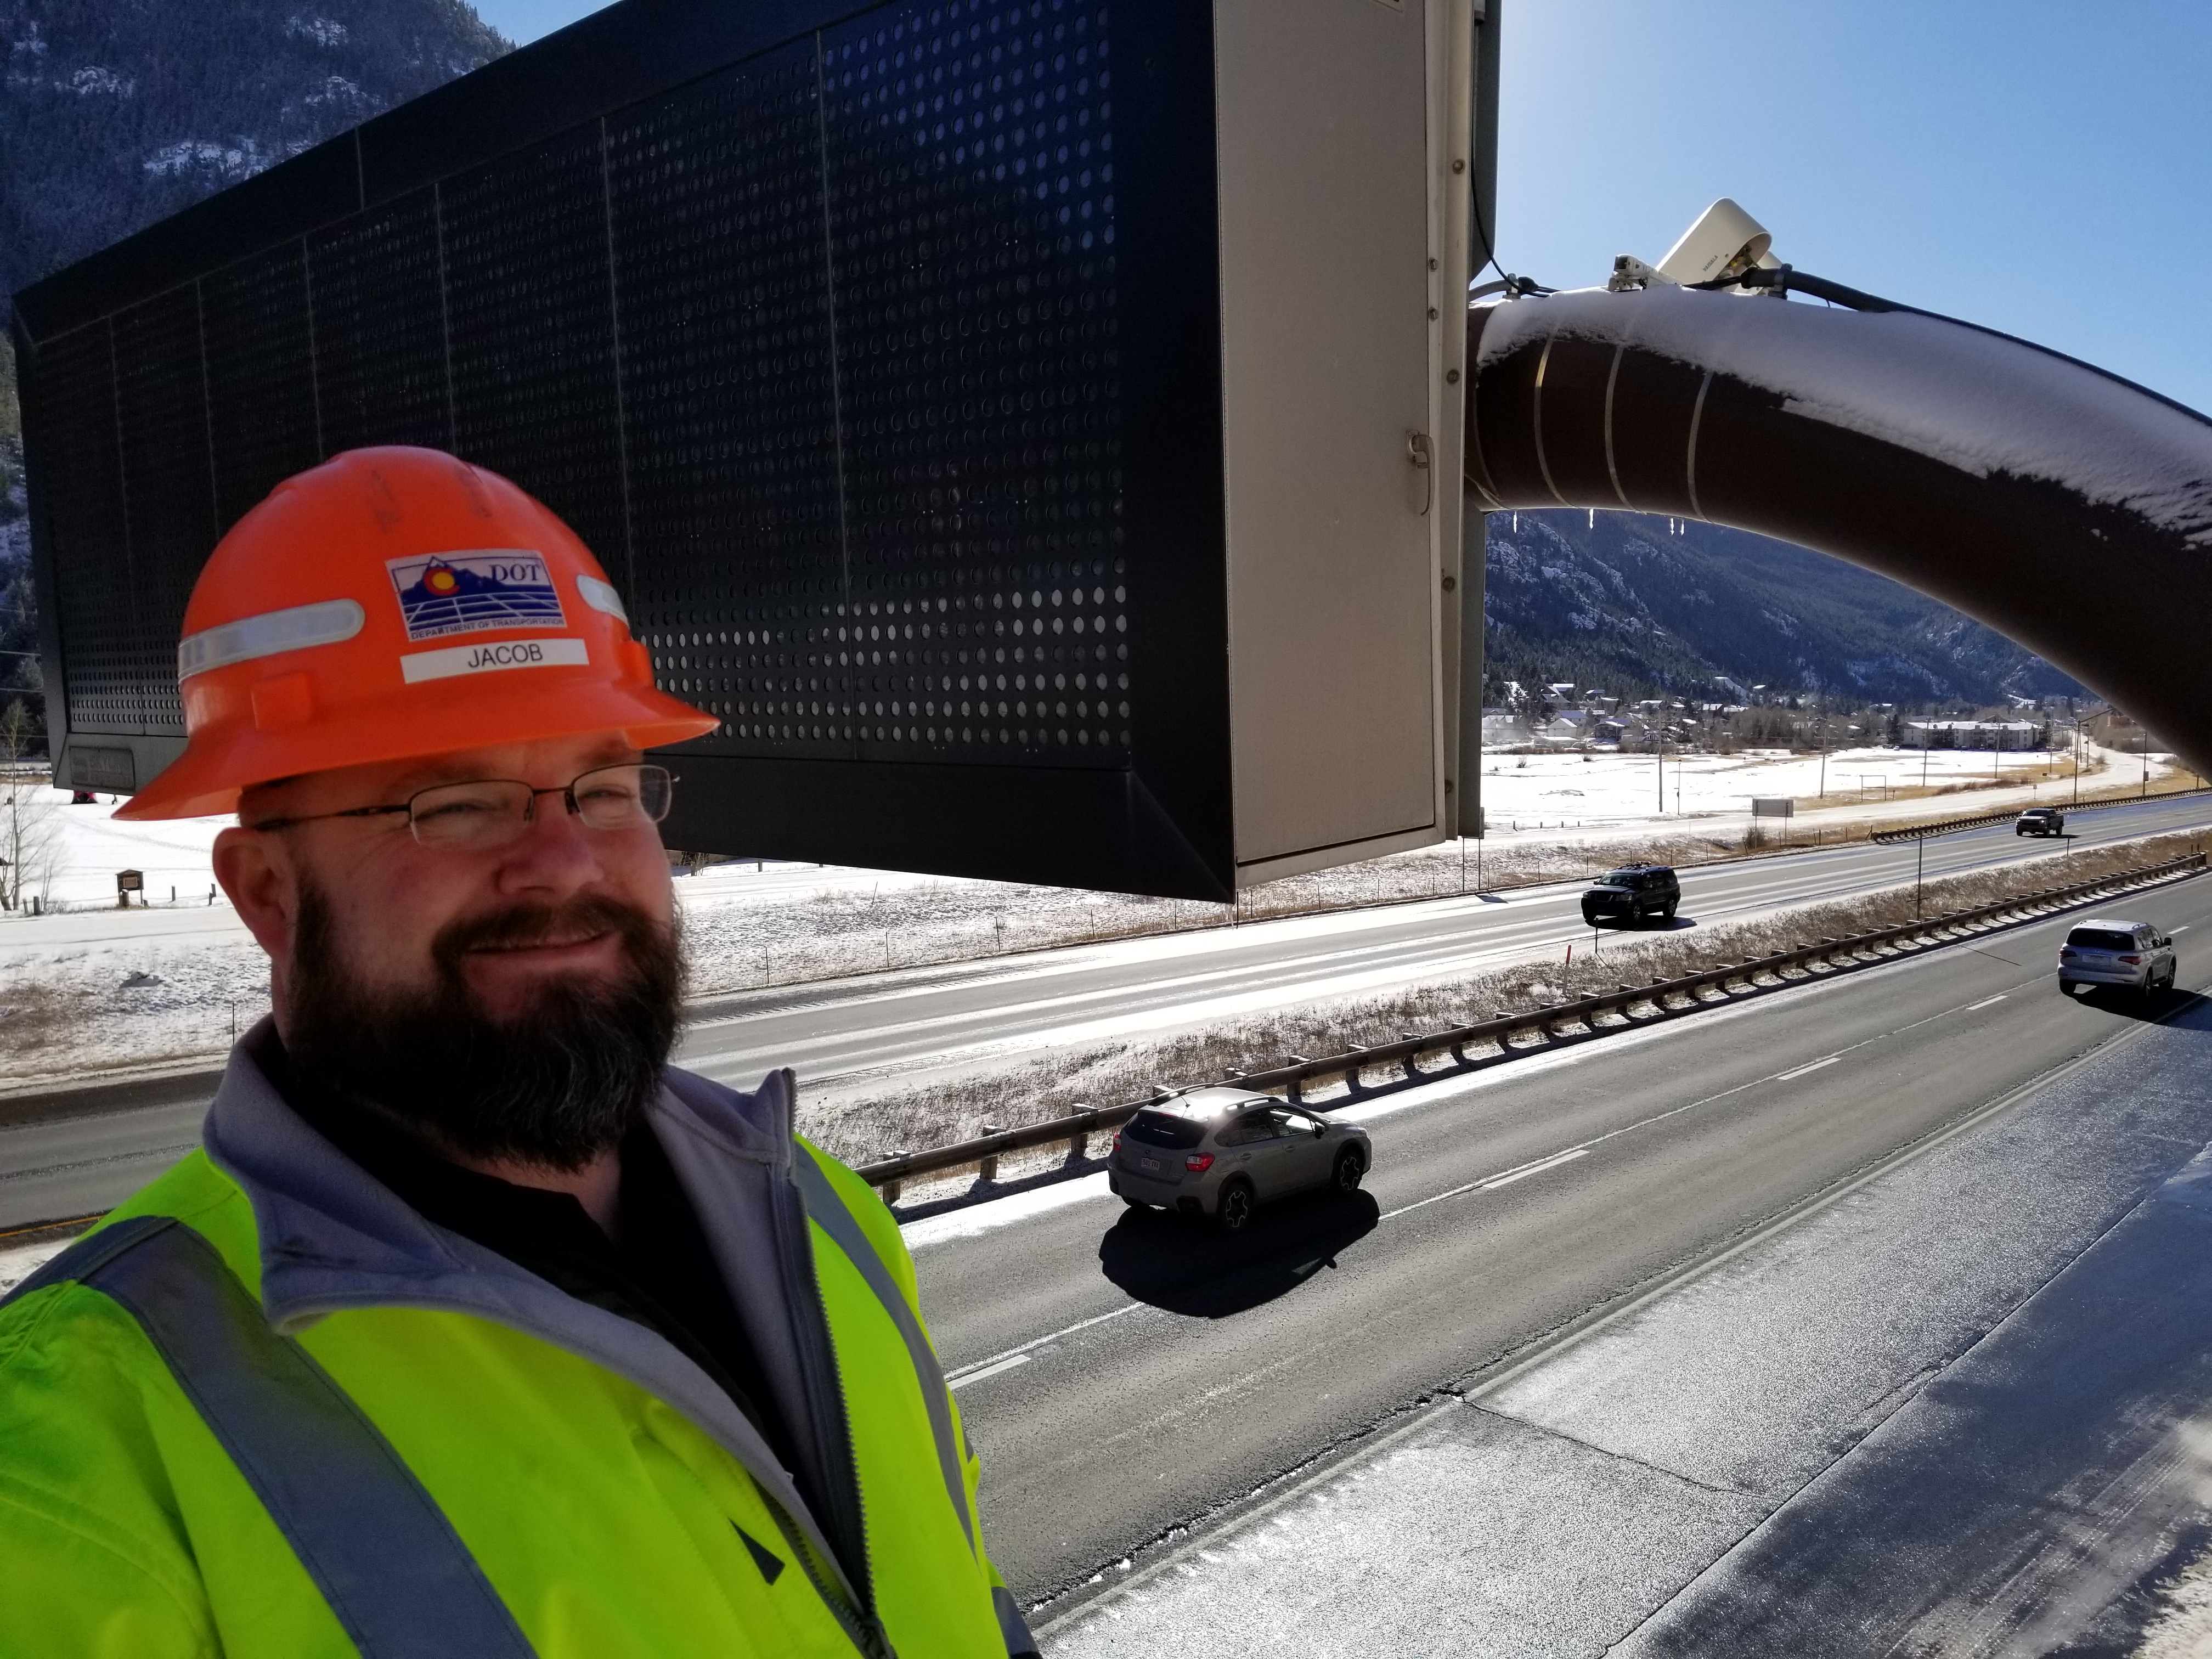 cdot employee with vms.jpg detail image